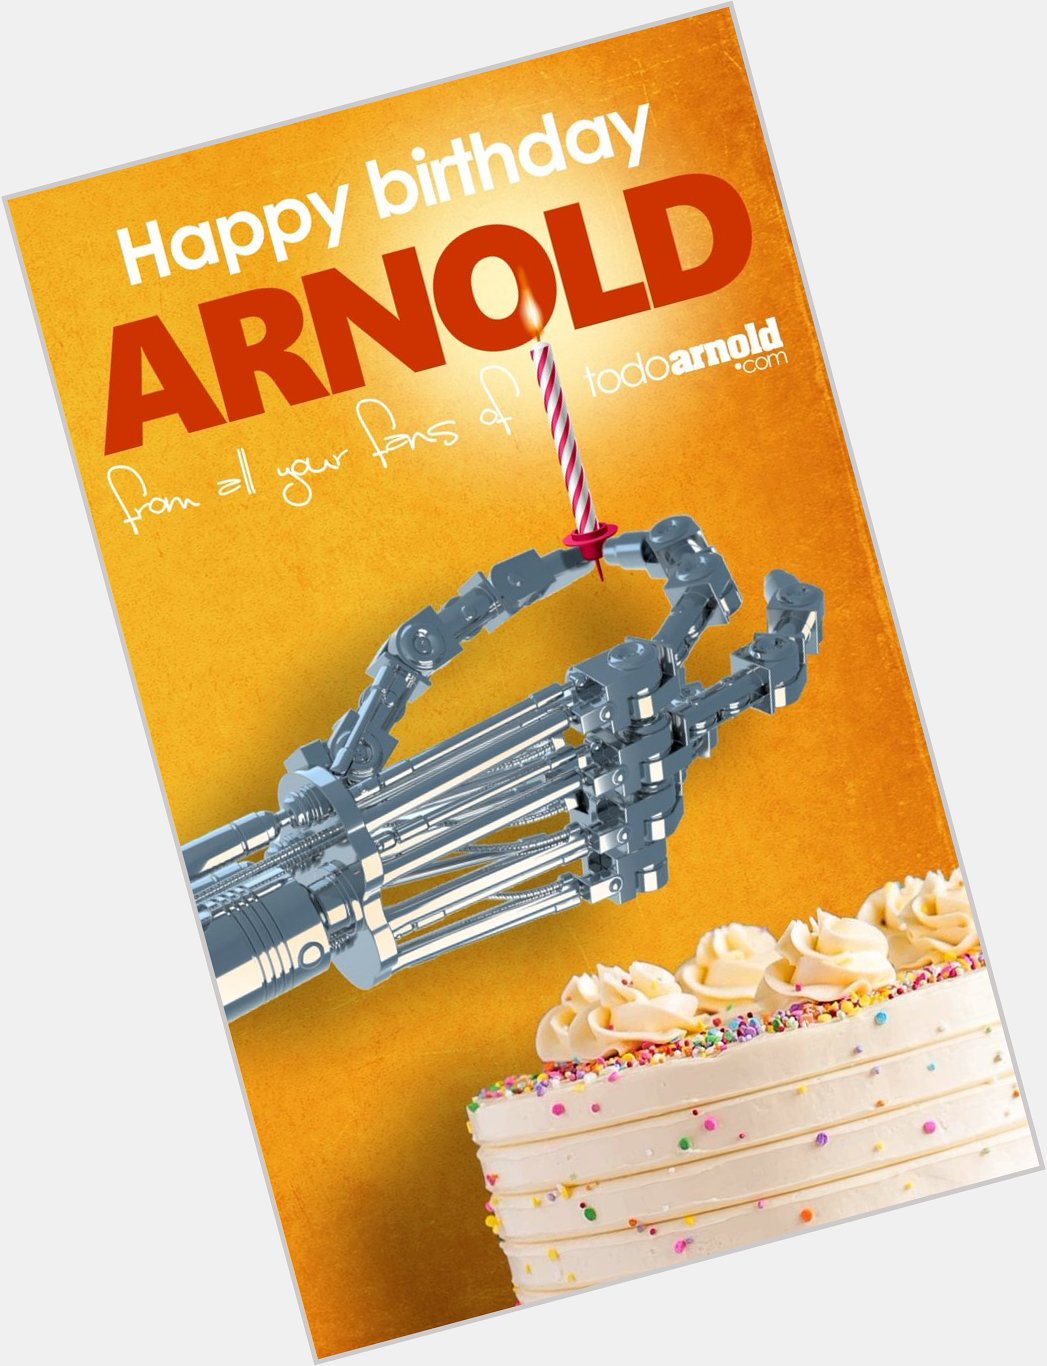 Happy birthday Arnold from all your fans of 